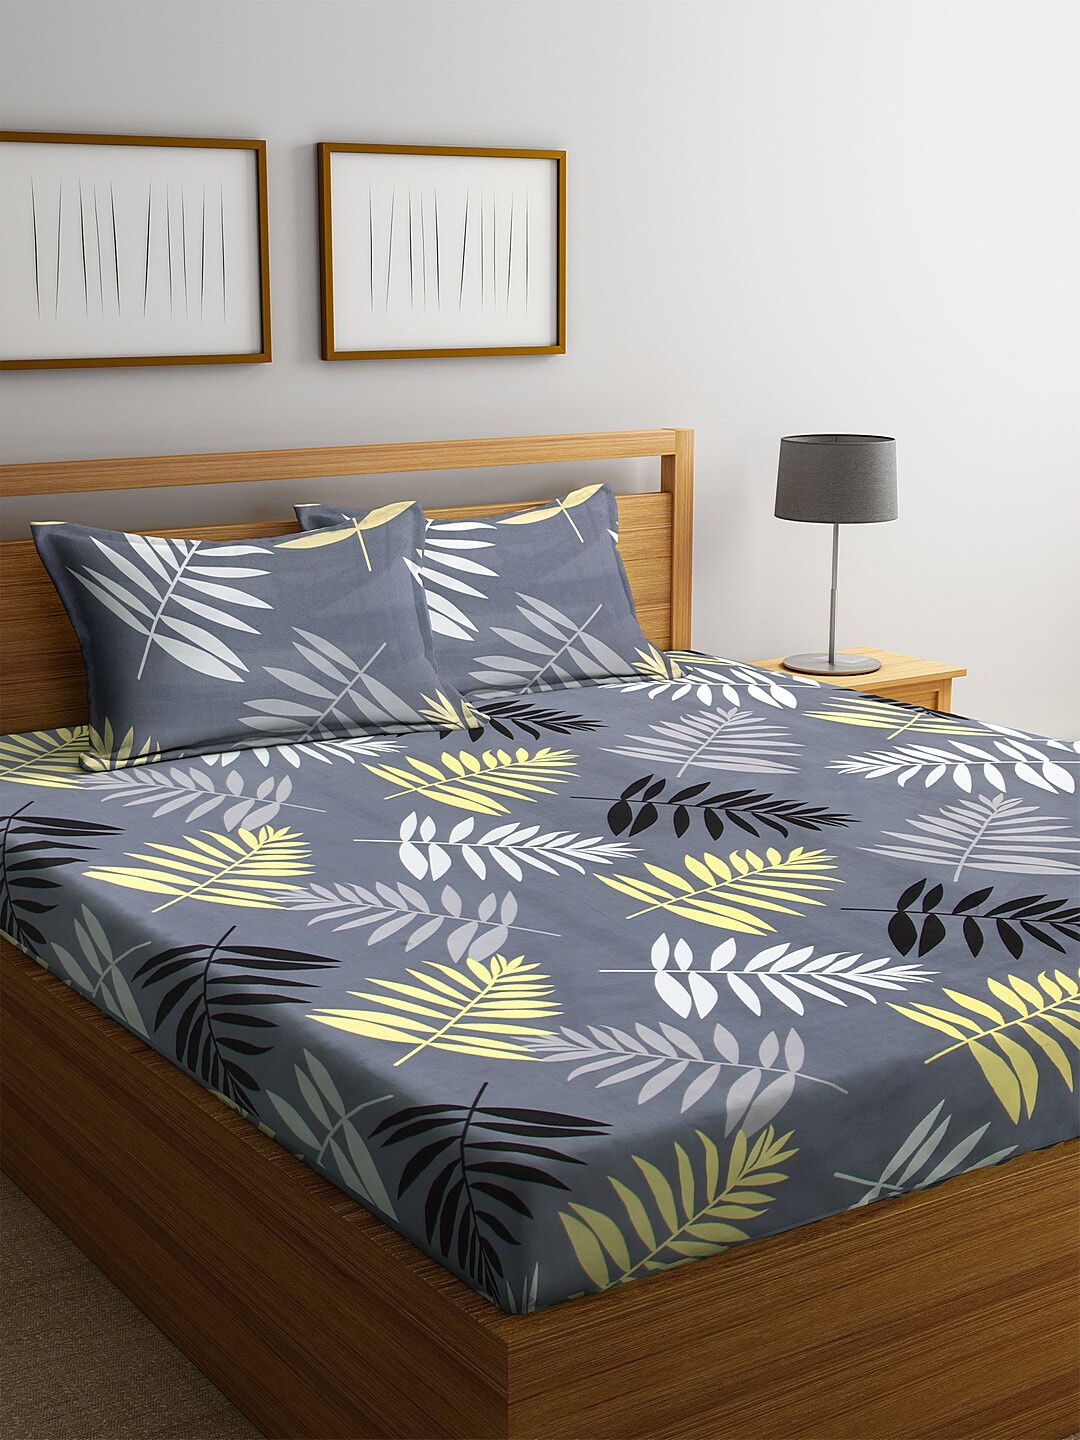 KLOTTHE Grey & Yellow Printed 210 TC Cotton Double King Bedsheet With 2 Pillow Covers Price in India